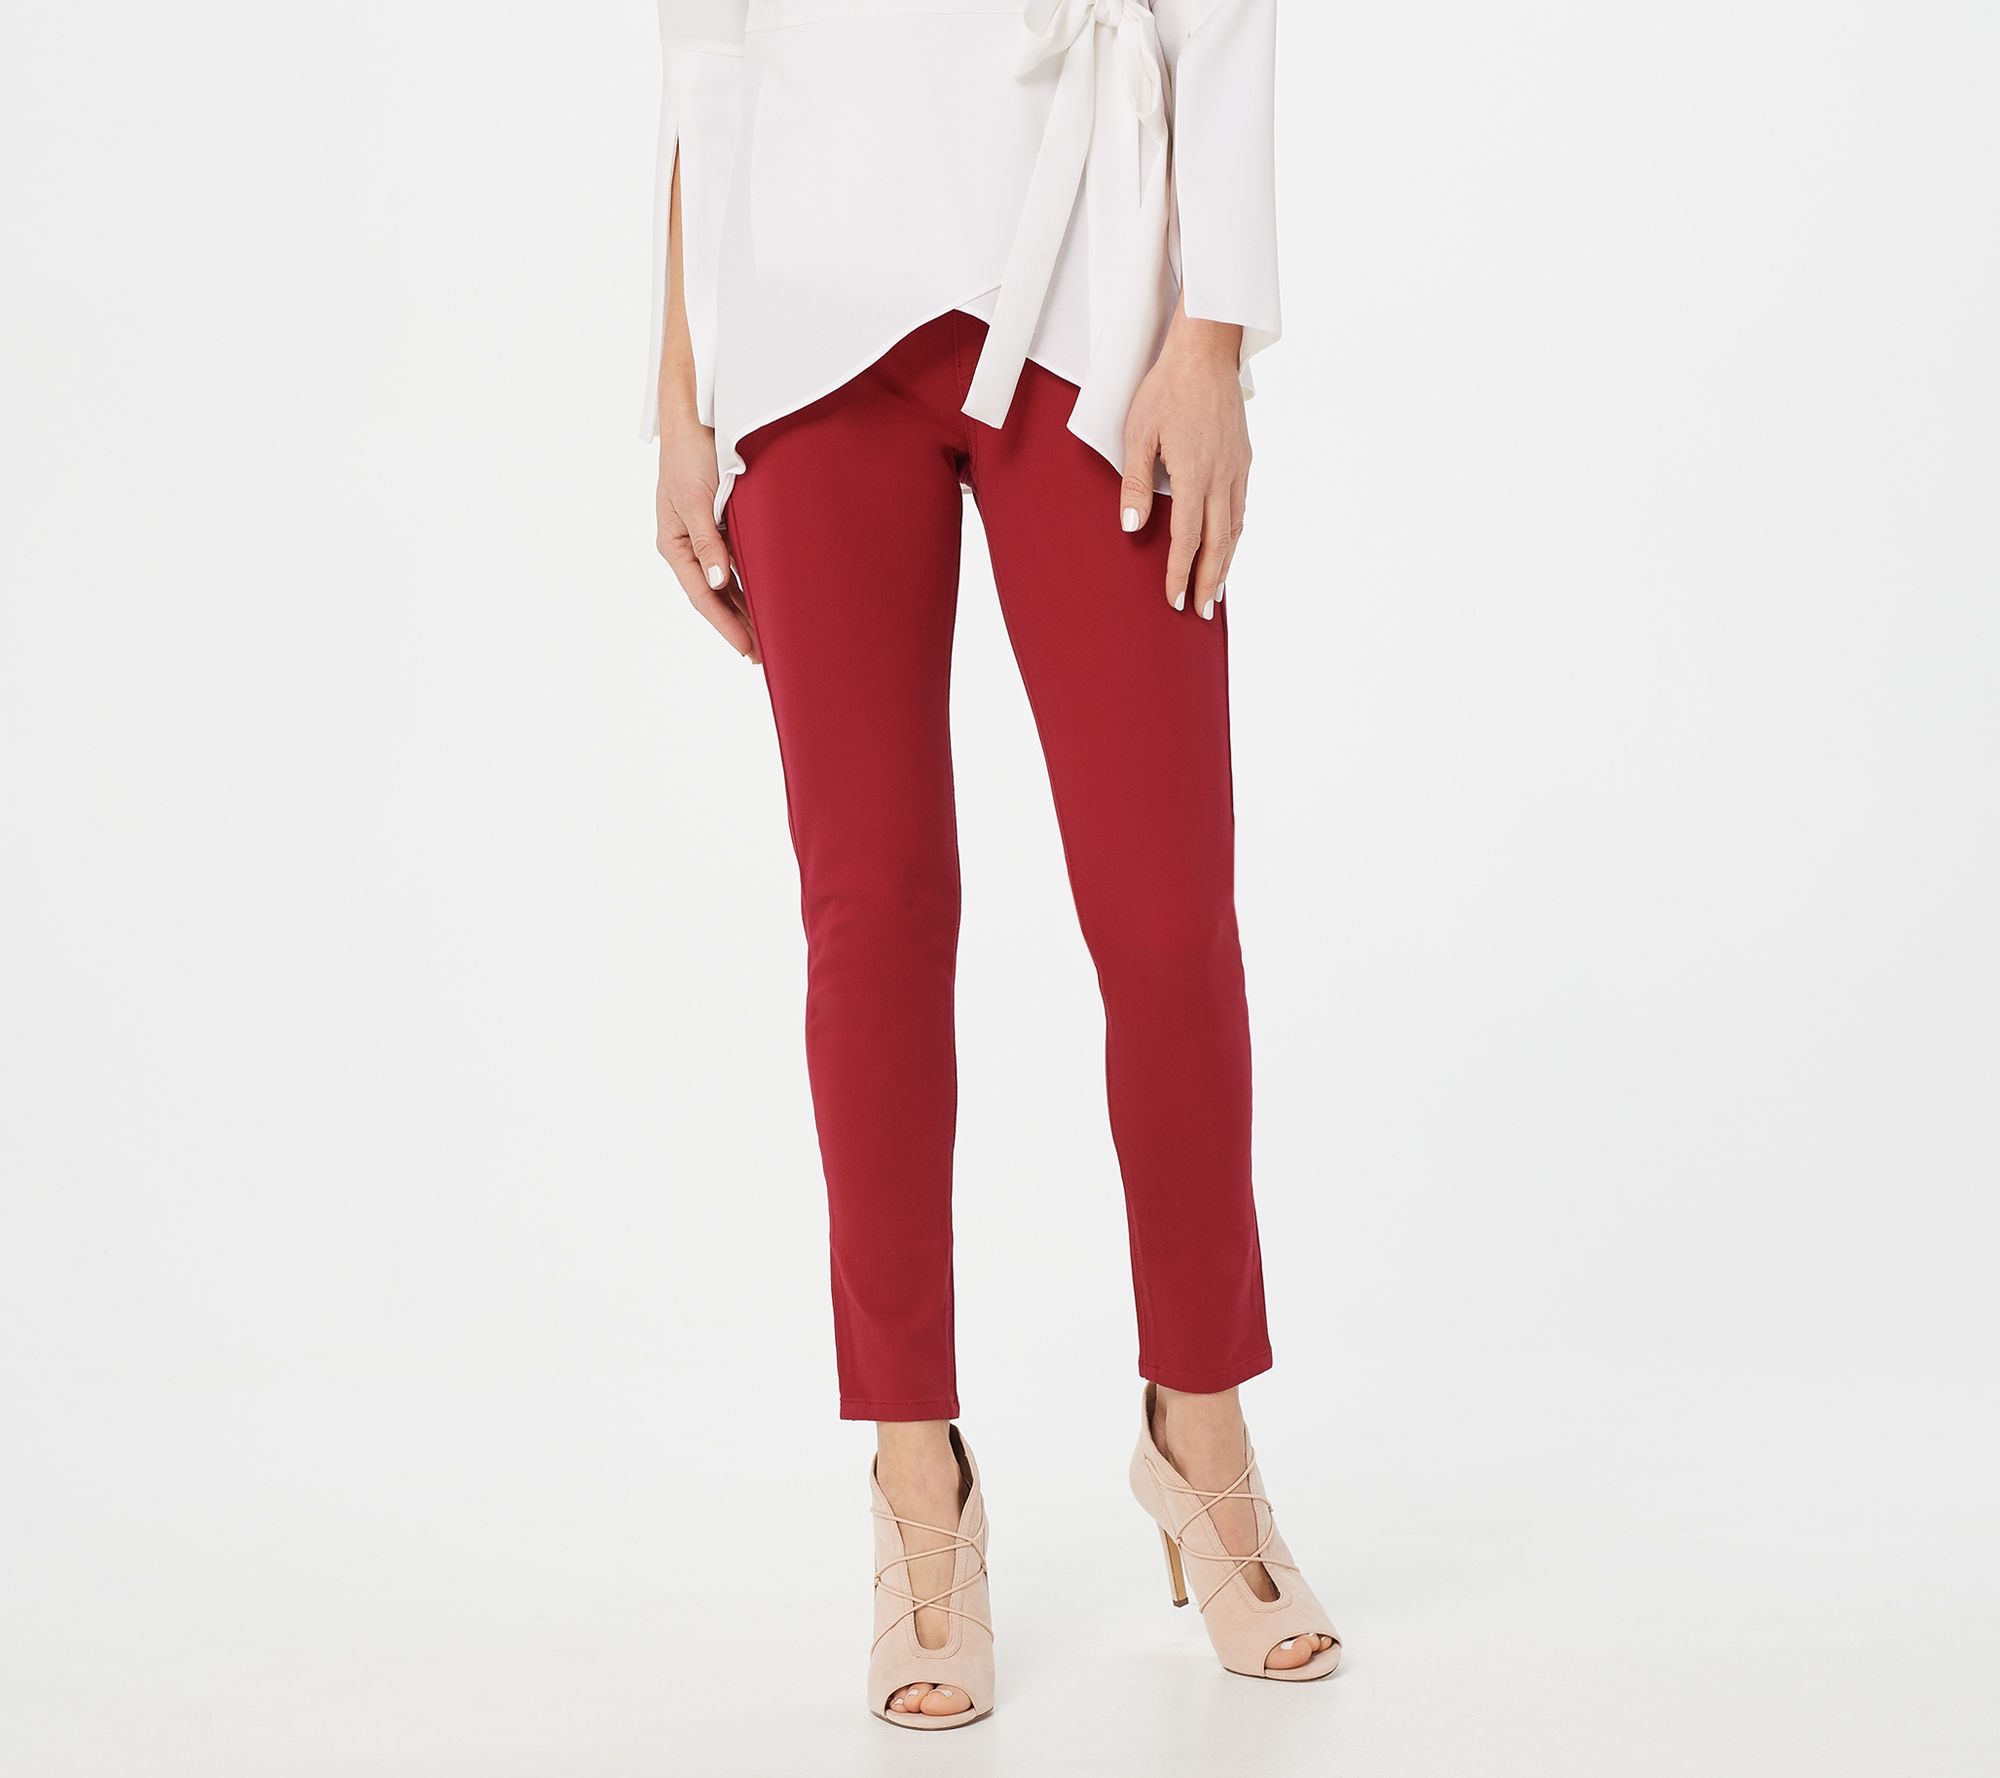 Laurie Felt Cambre Denim Ankle Skinny Pull-On Jeans - QVC.com